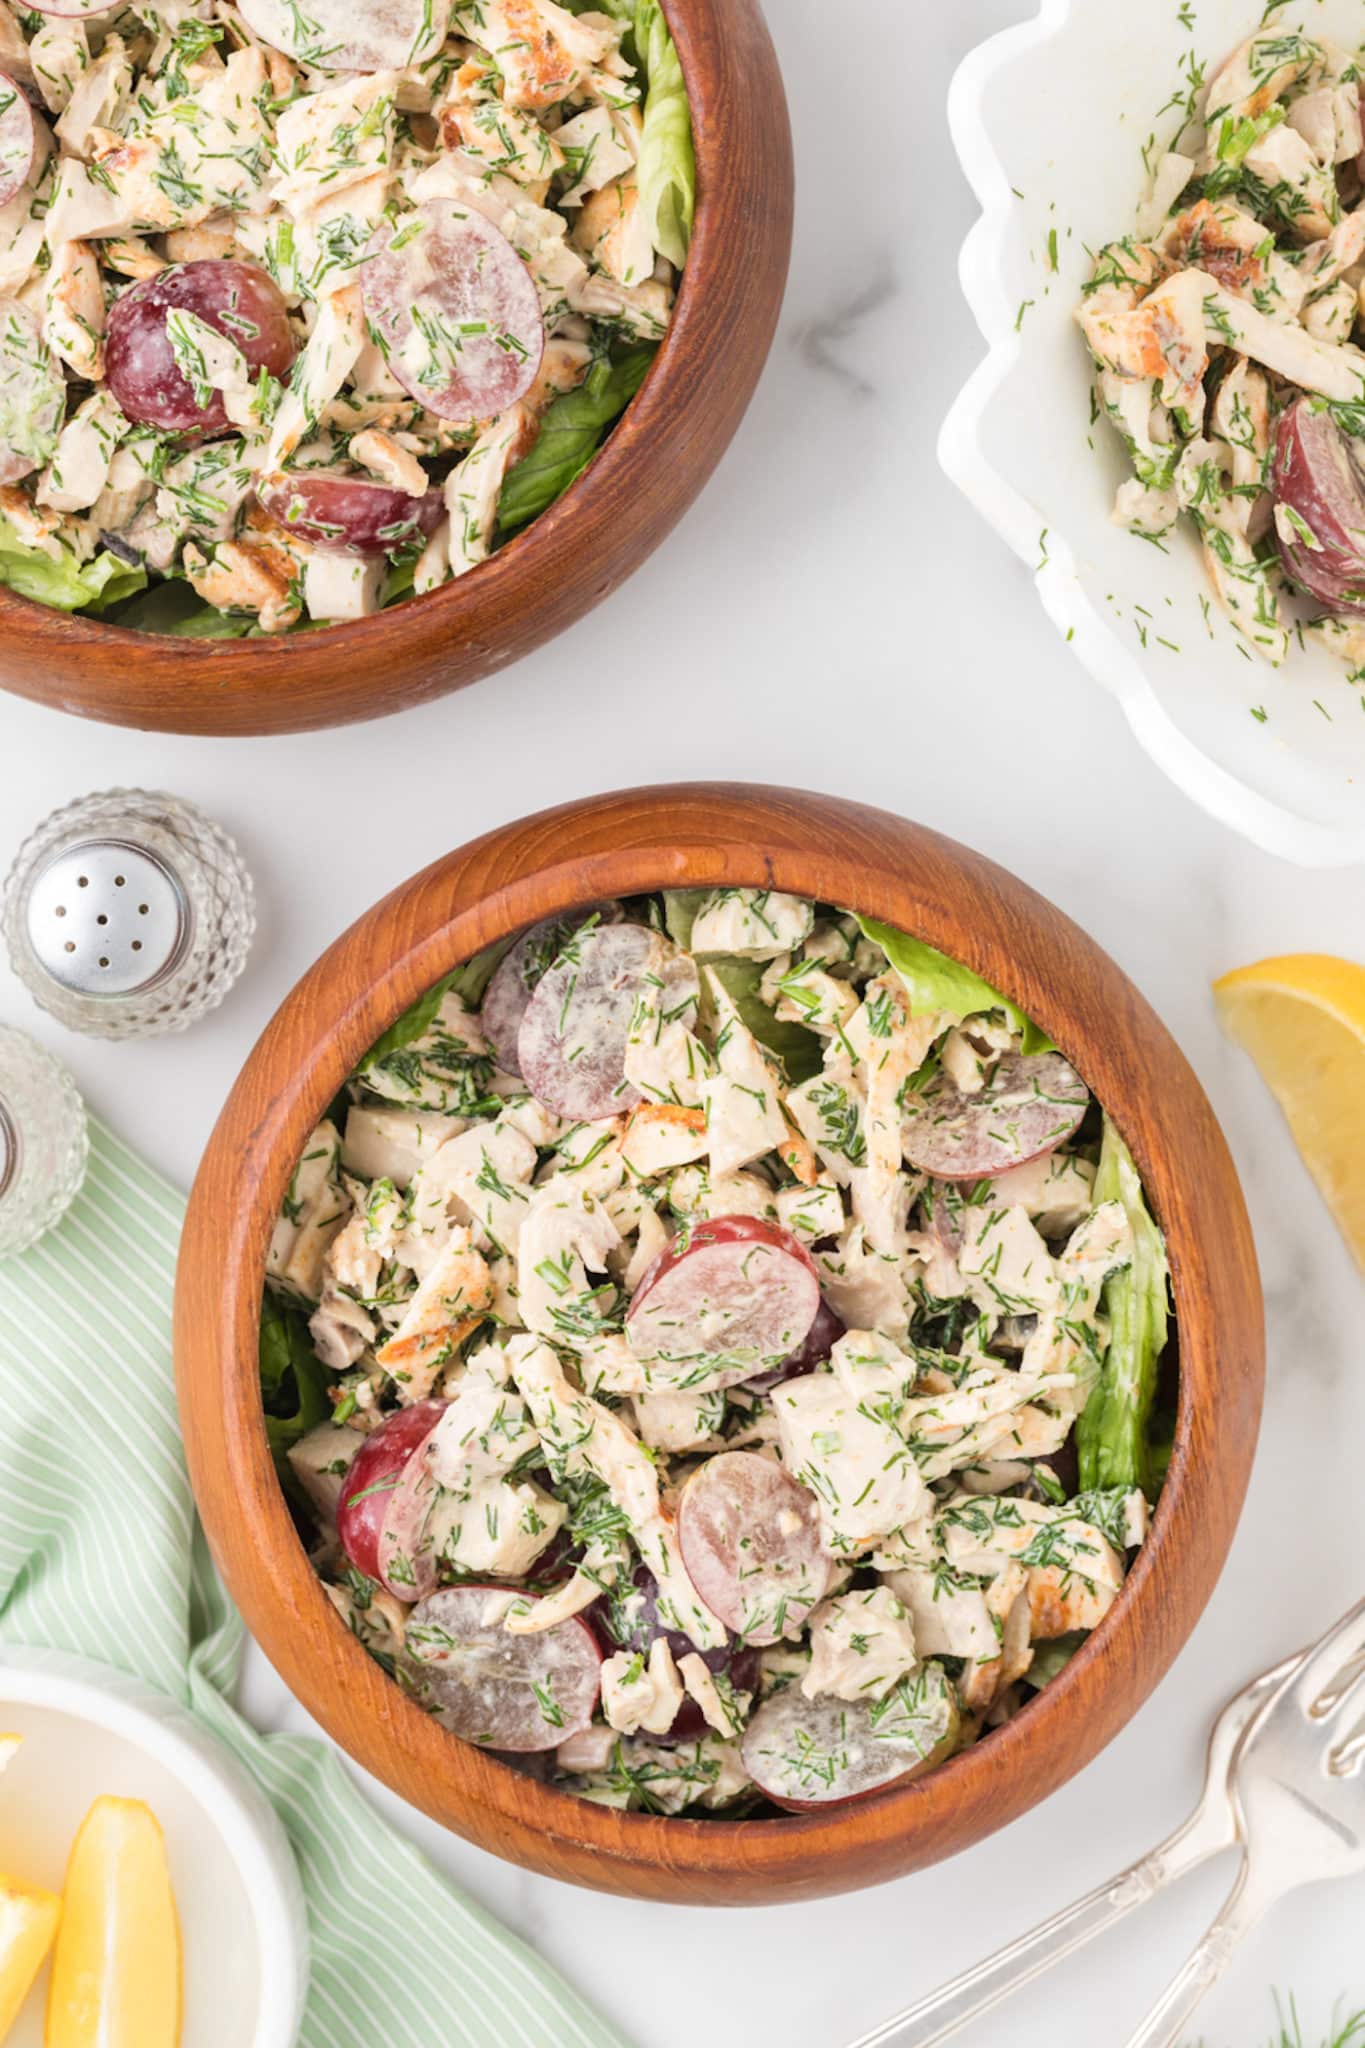 https://www.cleaneatingkitchen.com/wp-content/uploads/2021/11/healthy-chicken-salad-two-bowls-hero-scaled.jpg